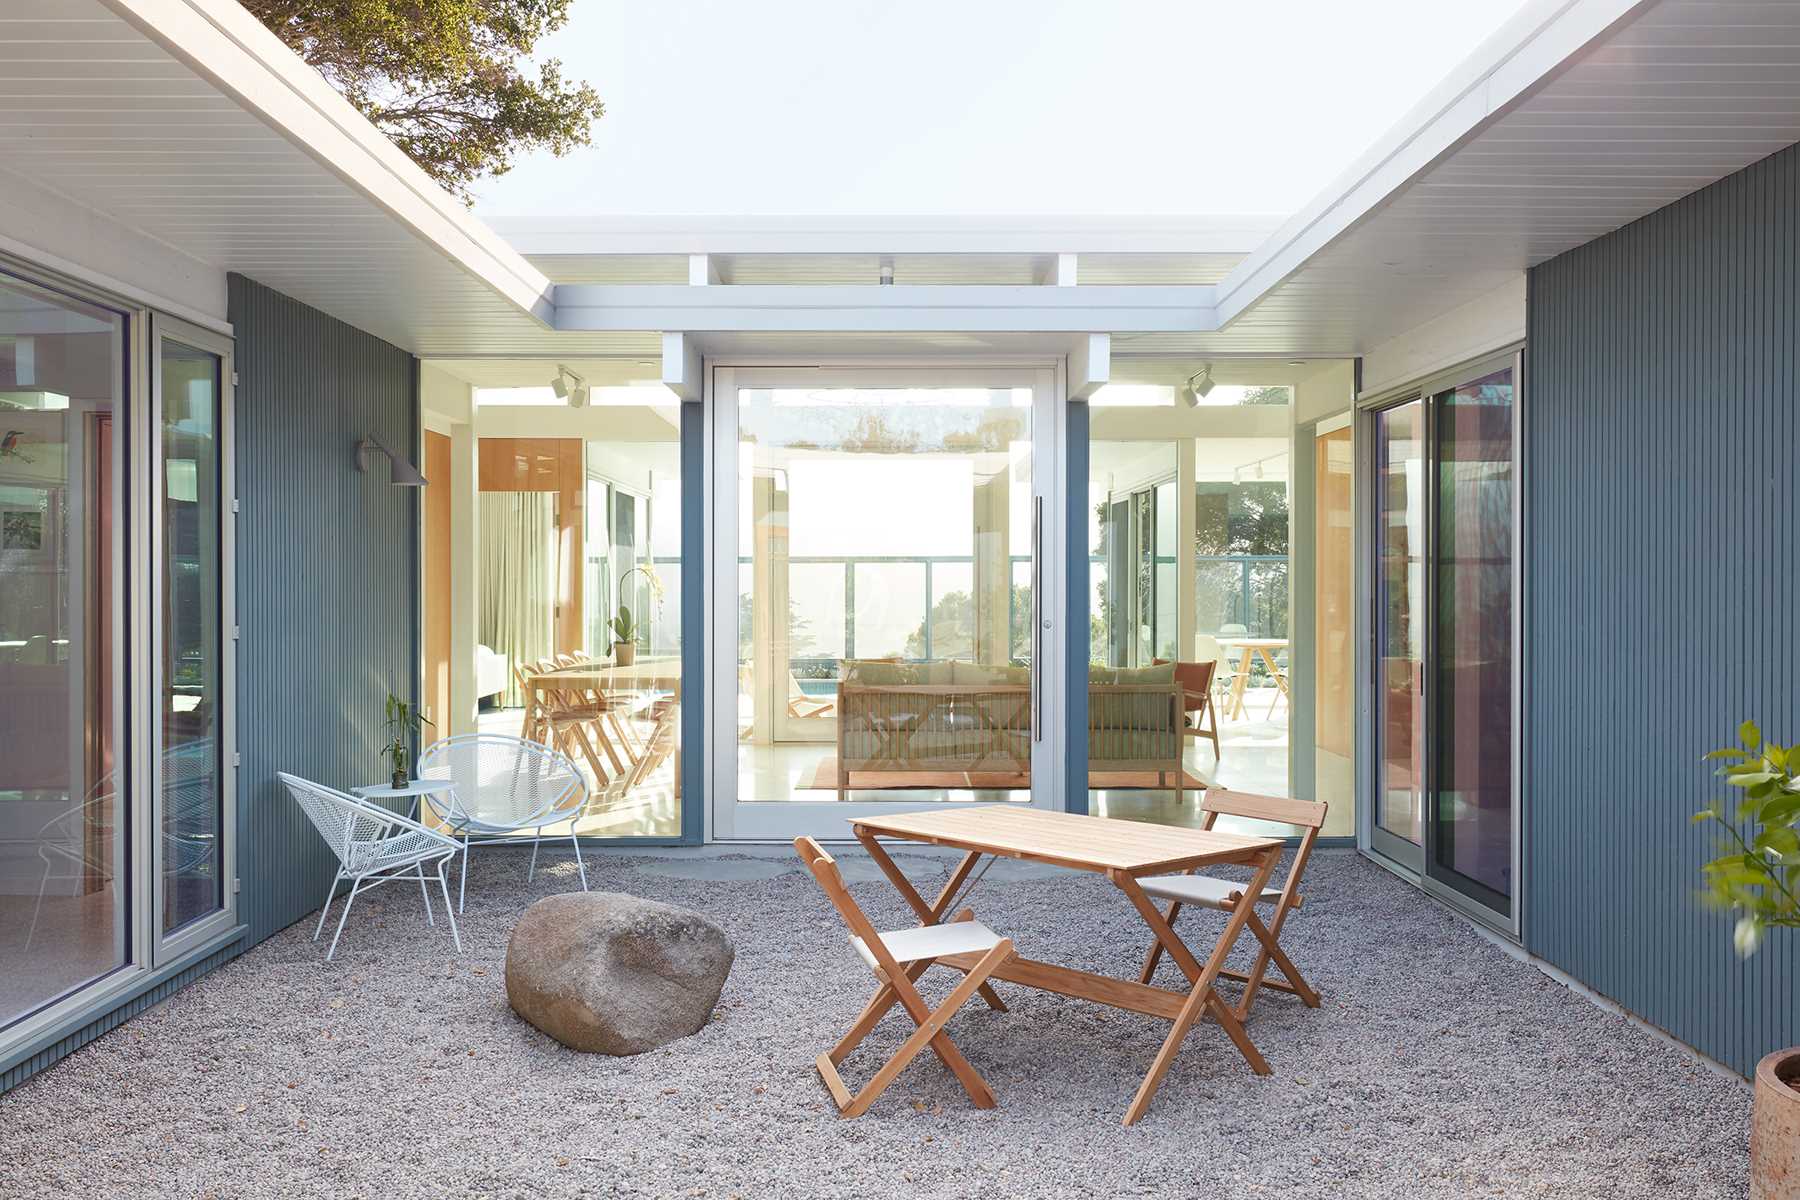 A remodeled Eichler home with a courtyard.